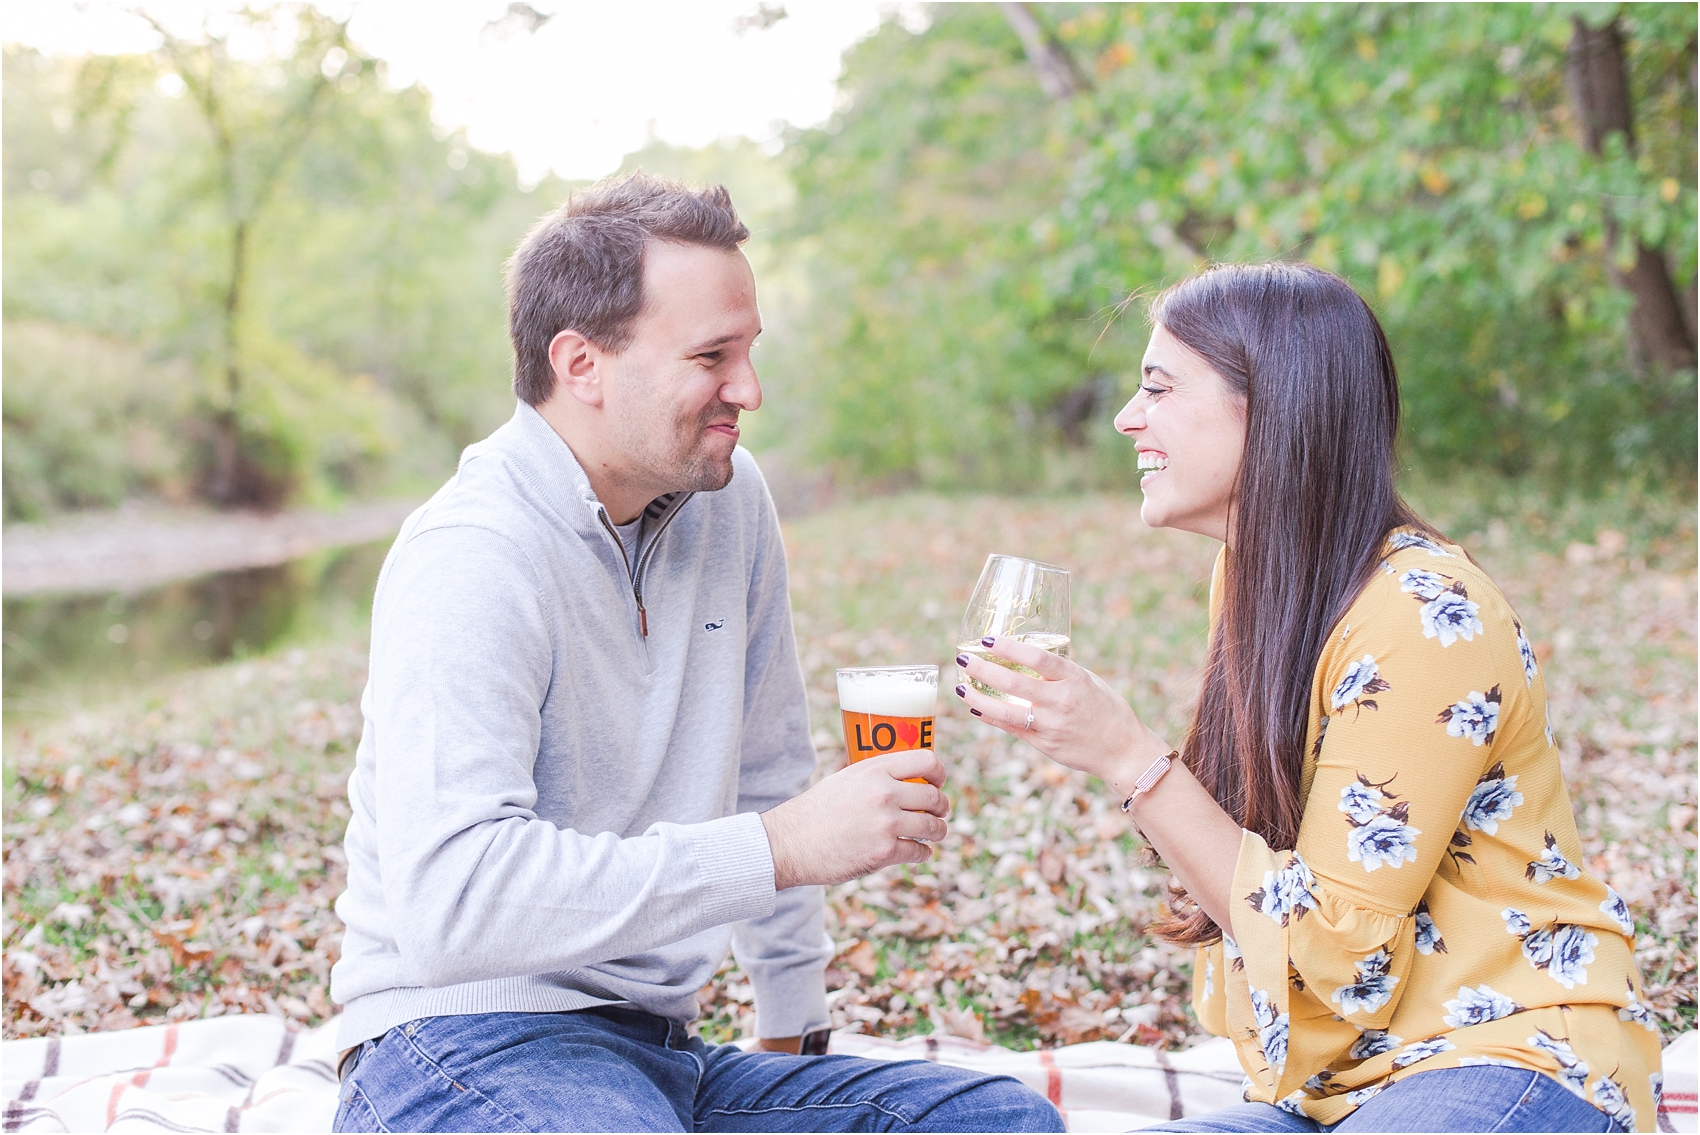 relaxed-autumn-engagement-photos-at-hudson-mills-metropark-in-dexter-mi-by-courtney-carolyn-photography_0021.jpg